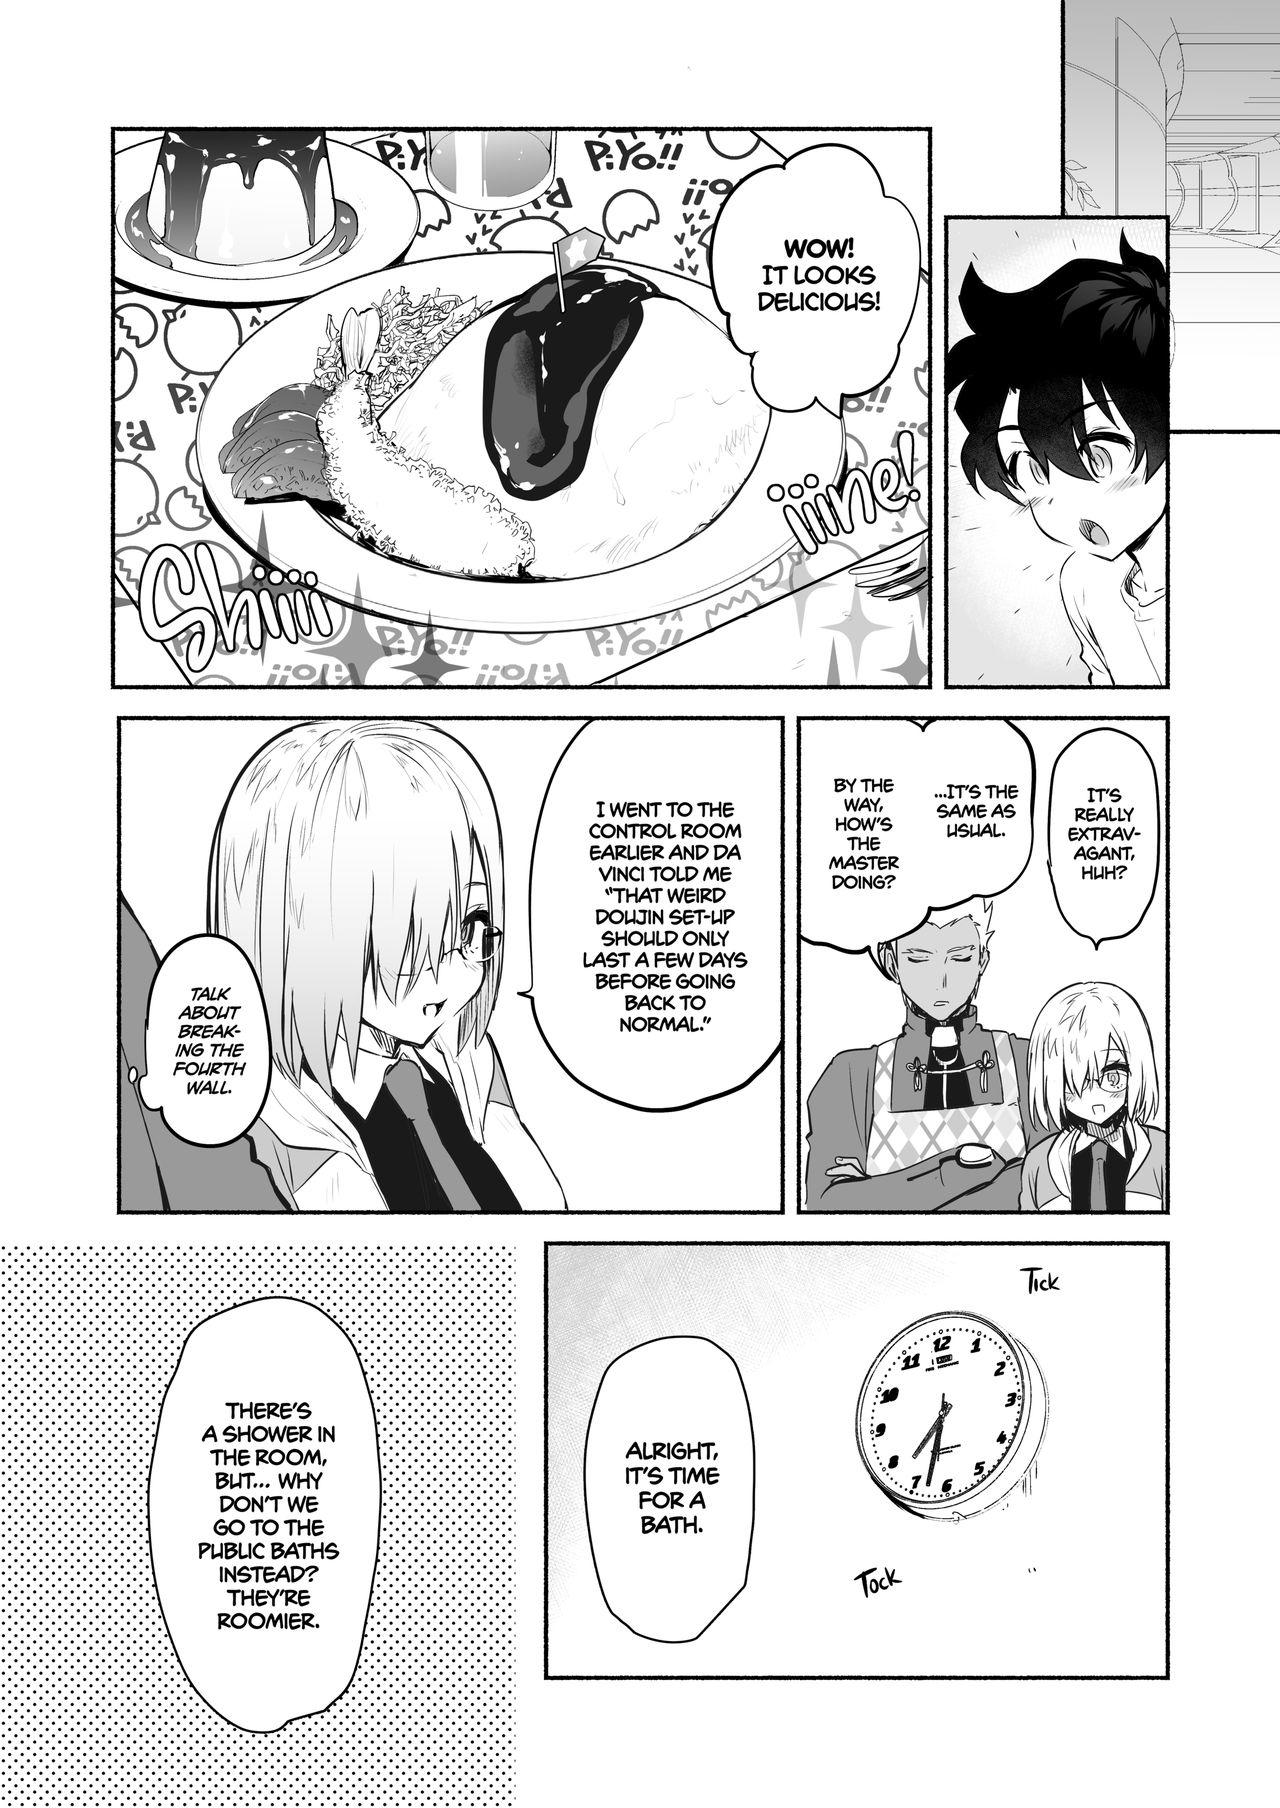 Missionary Position Porn Mash to Issho | Together with Mash - Fate grand order Dildo Fucking - Page 6